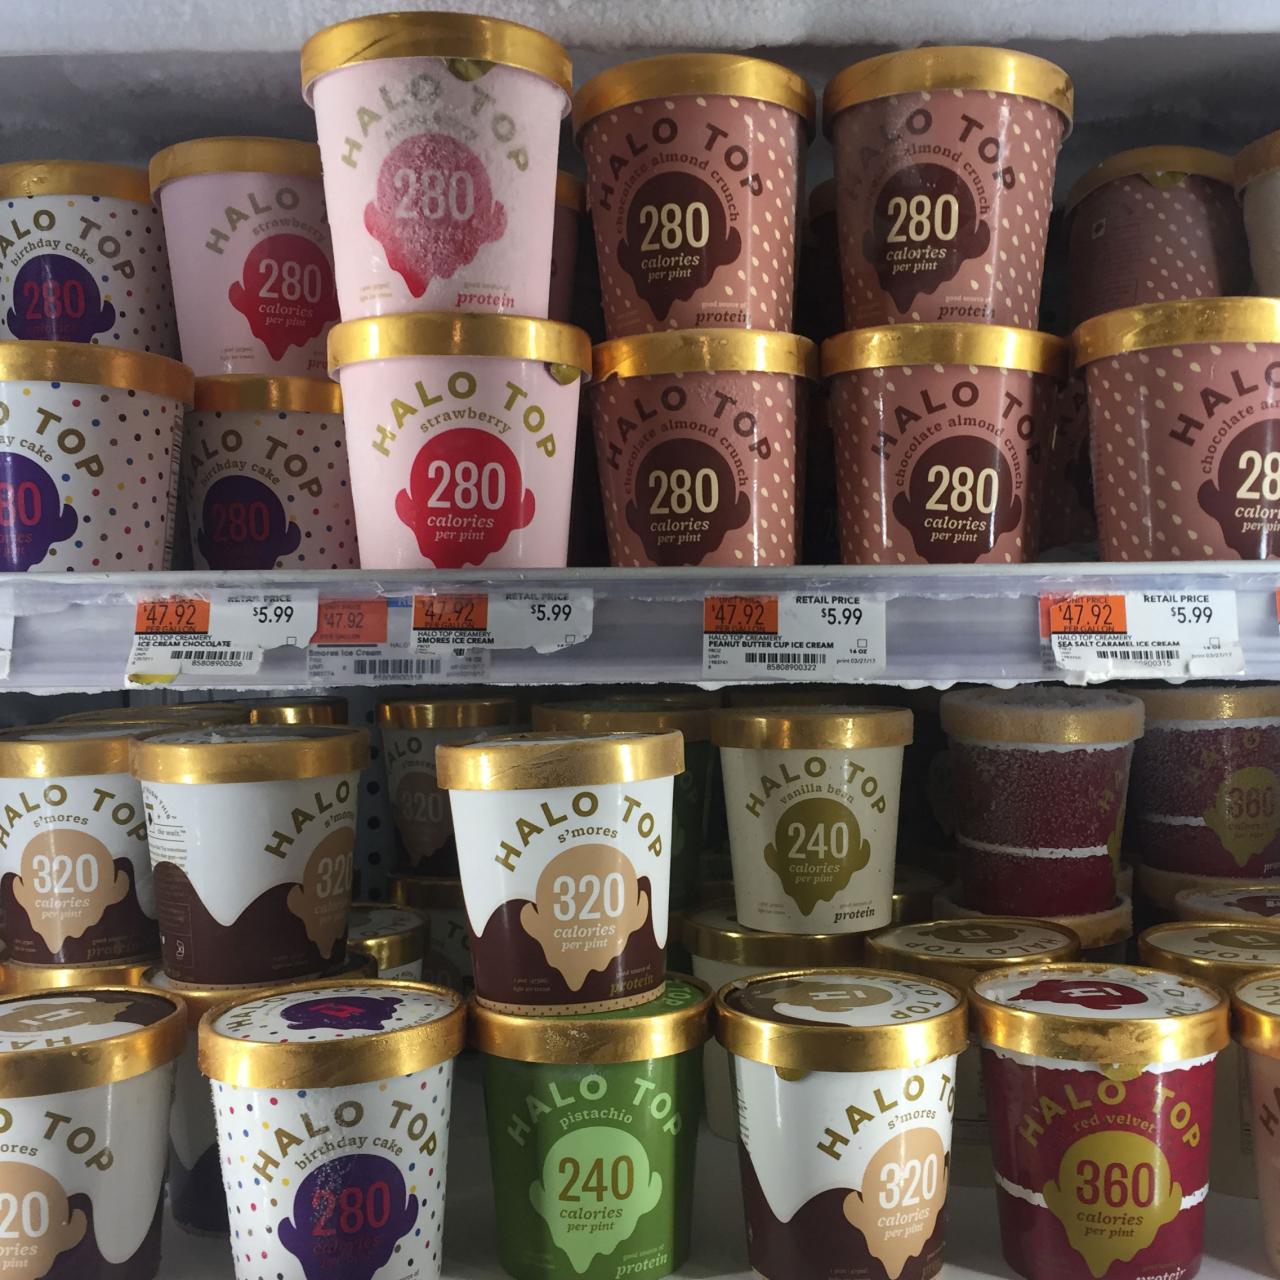 Halo Top Review: A Dietitian's Take on Taste and Nutrition